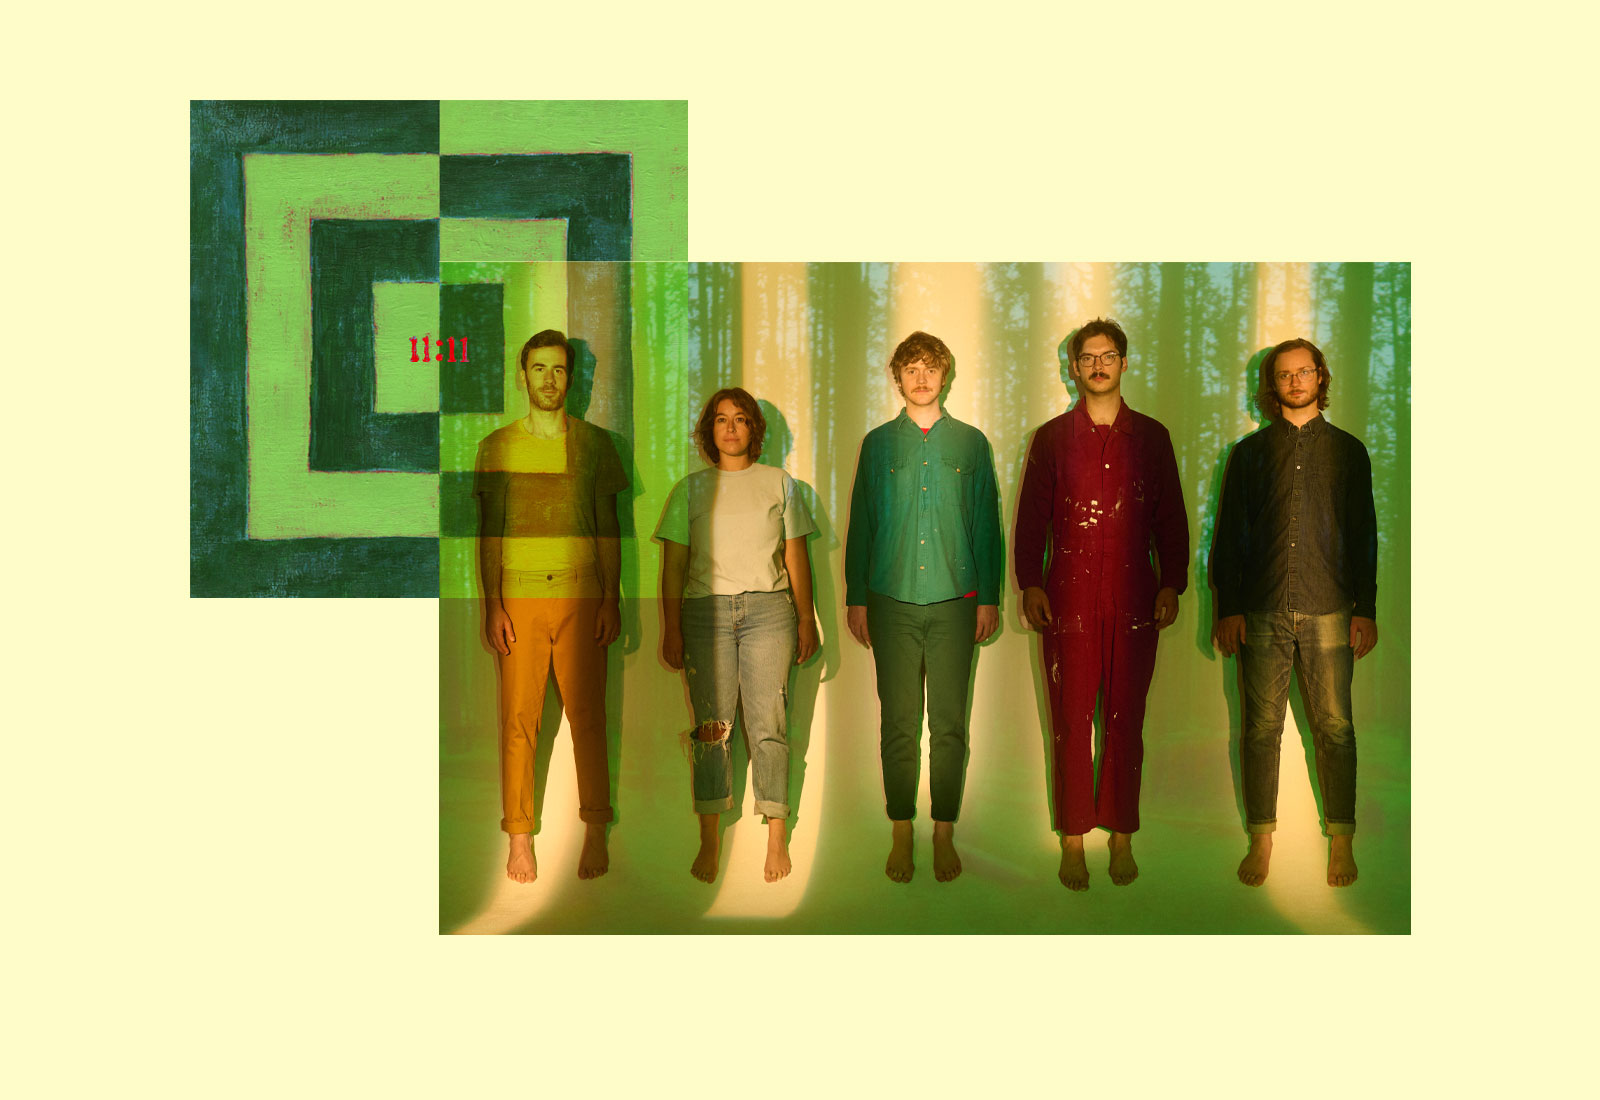 Green striped album cover with 11:11 in red text placed on top of photo of four men and a woman standing in a row with forested background